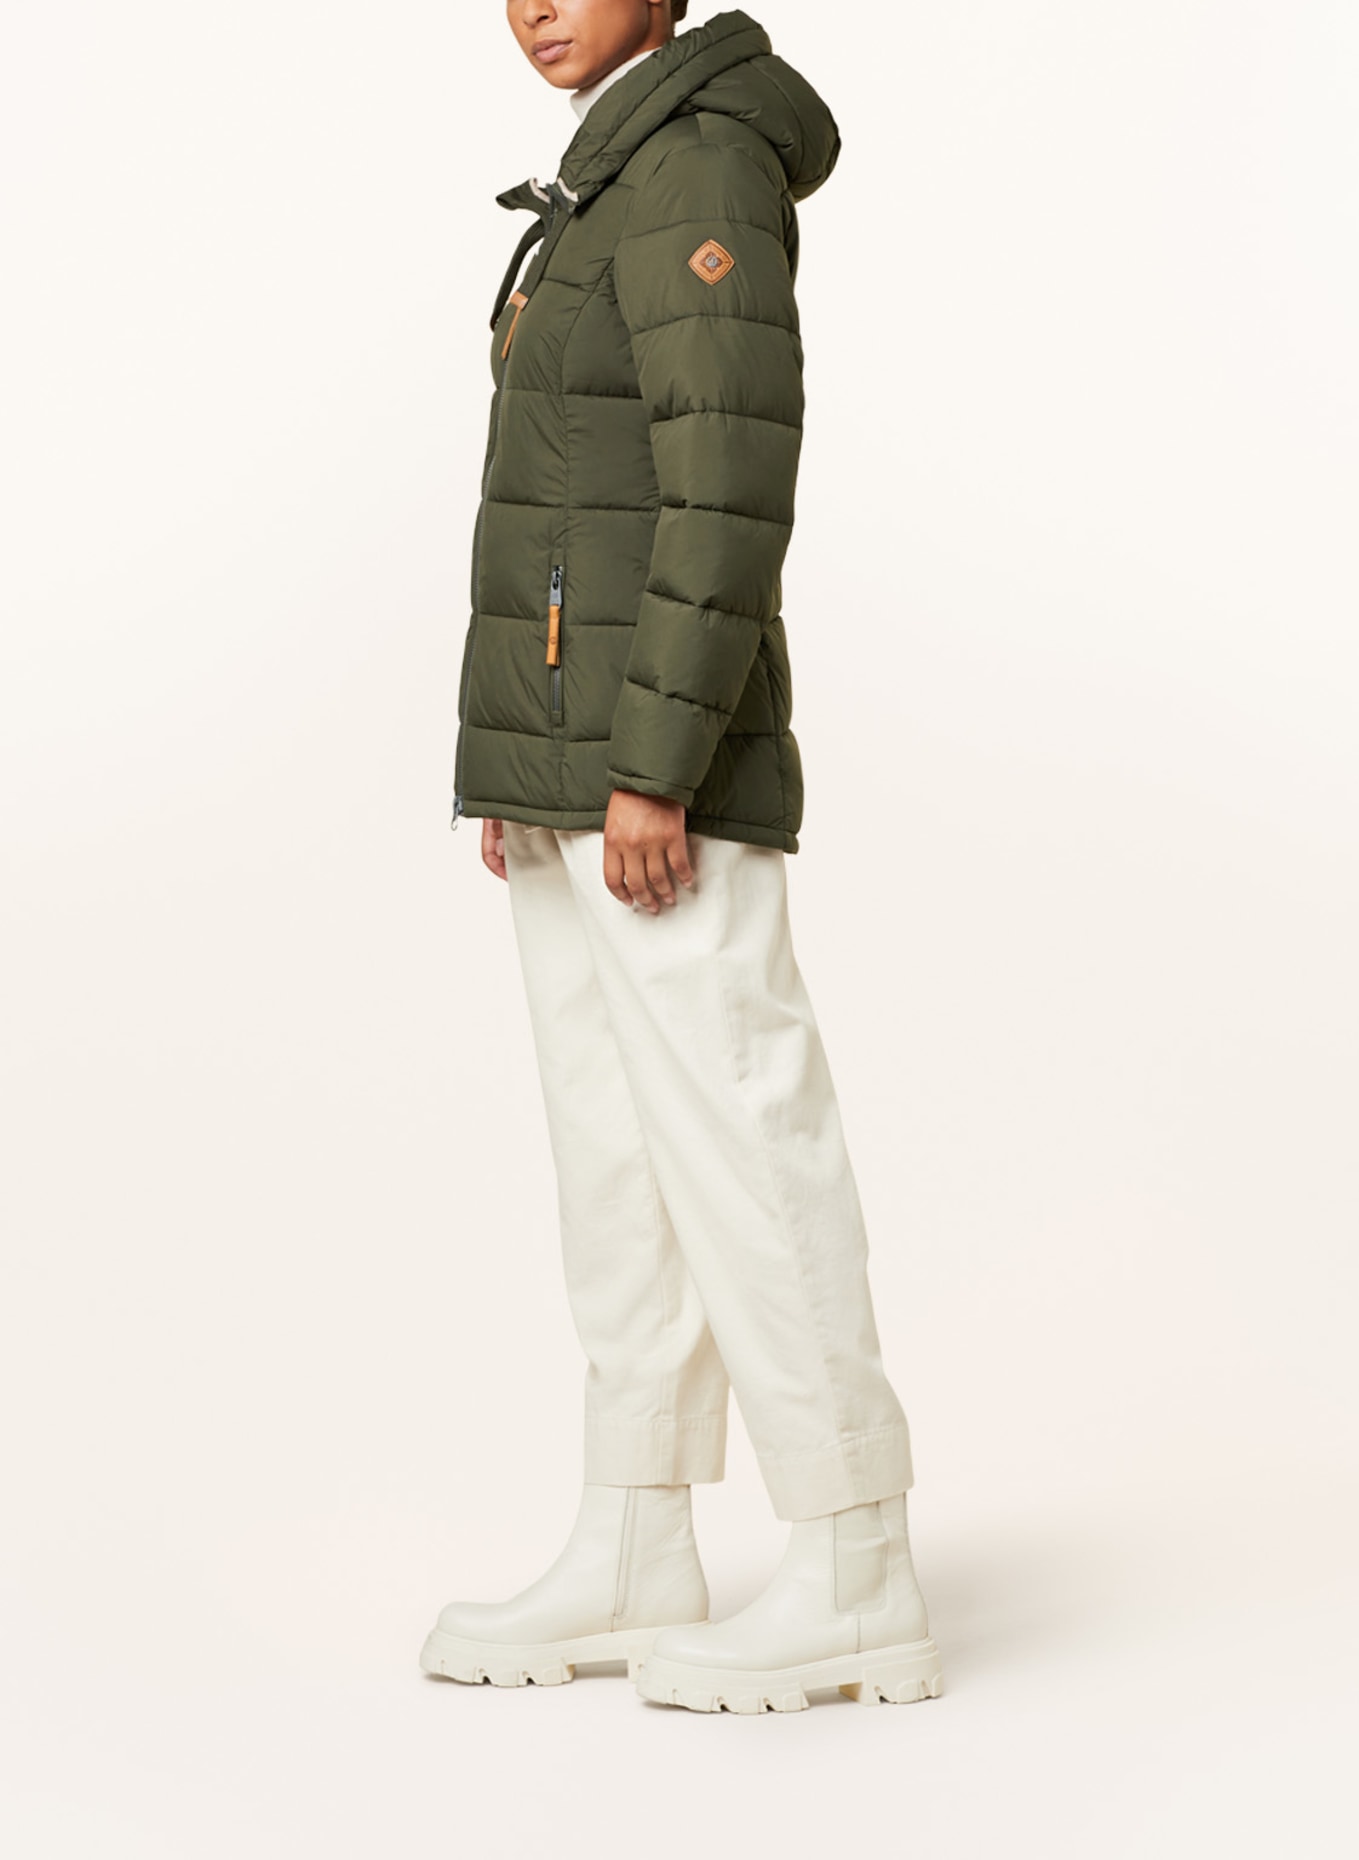 G.I.G.A. DX by killtec olive jacket in Quilted